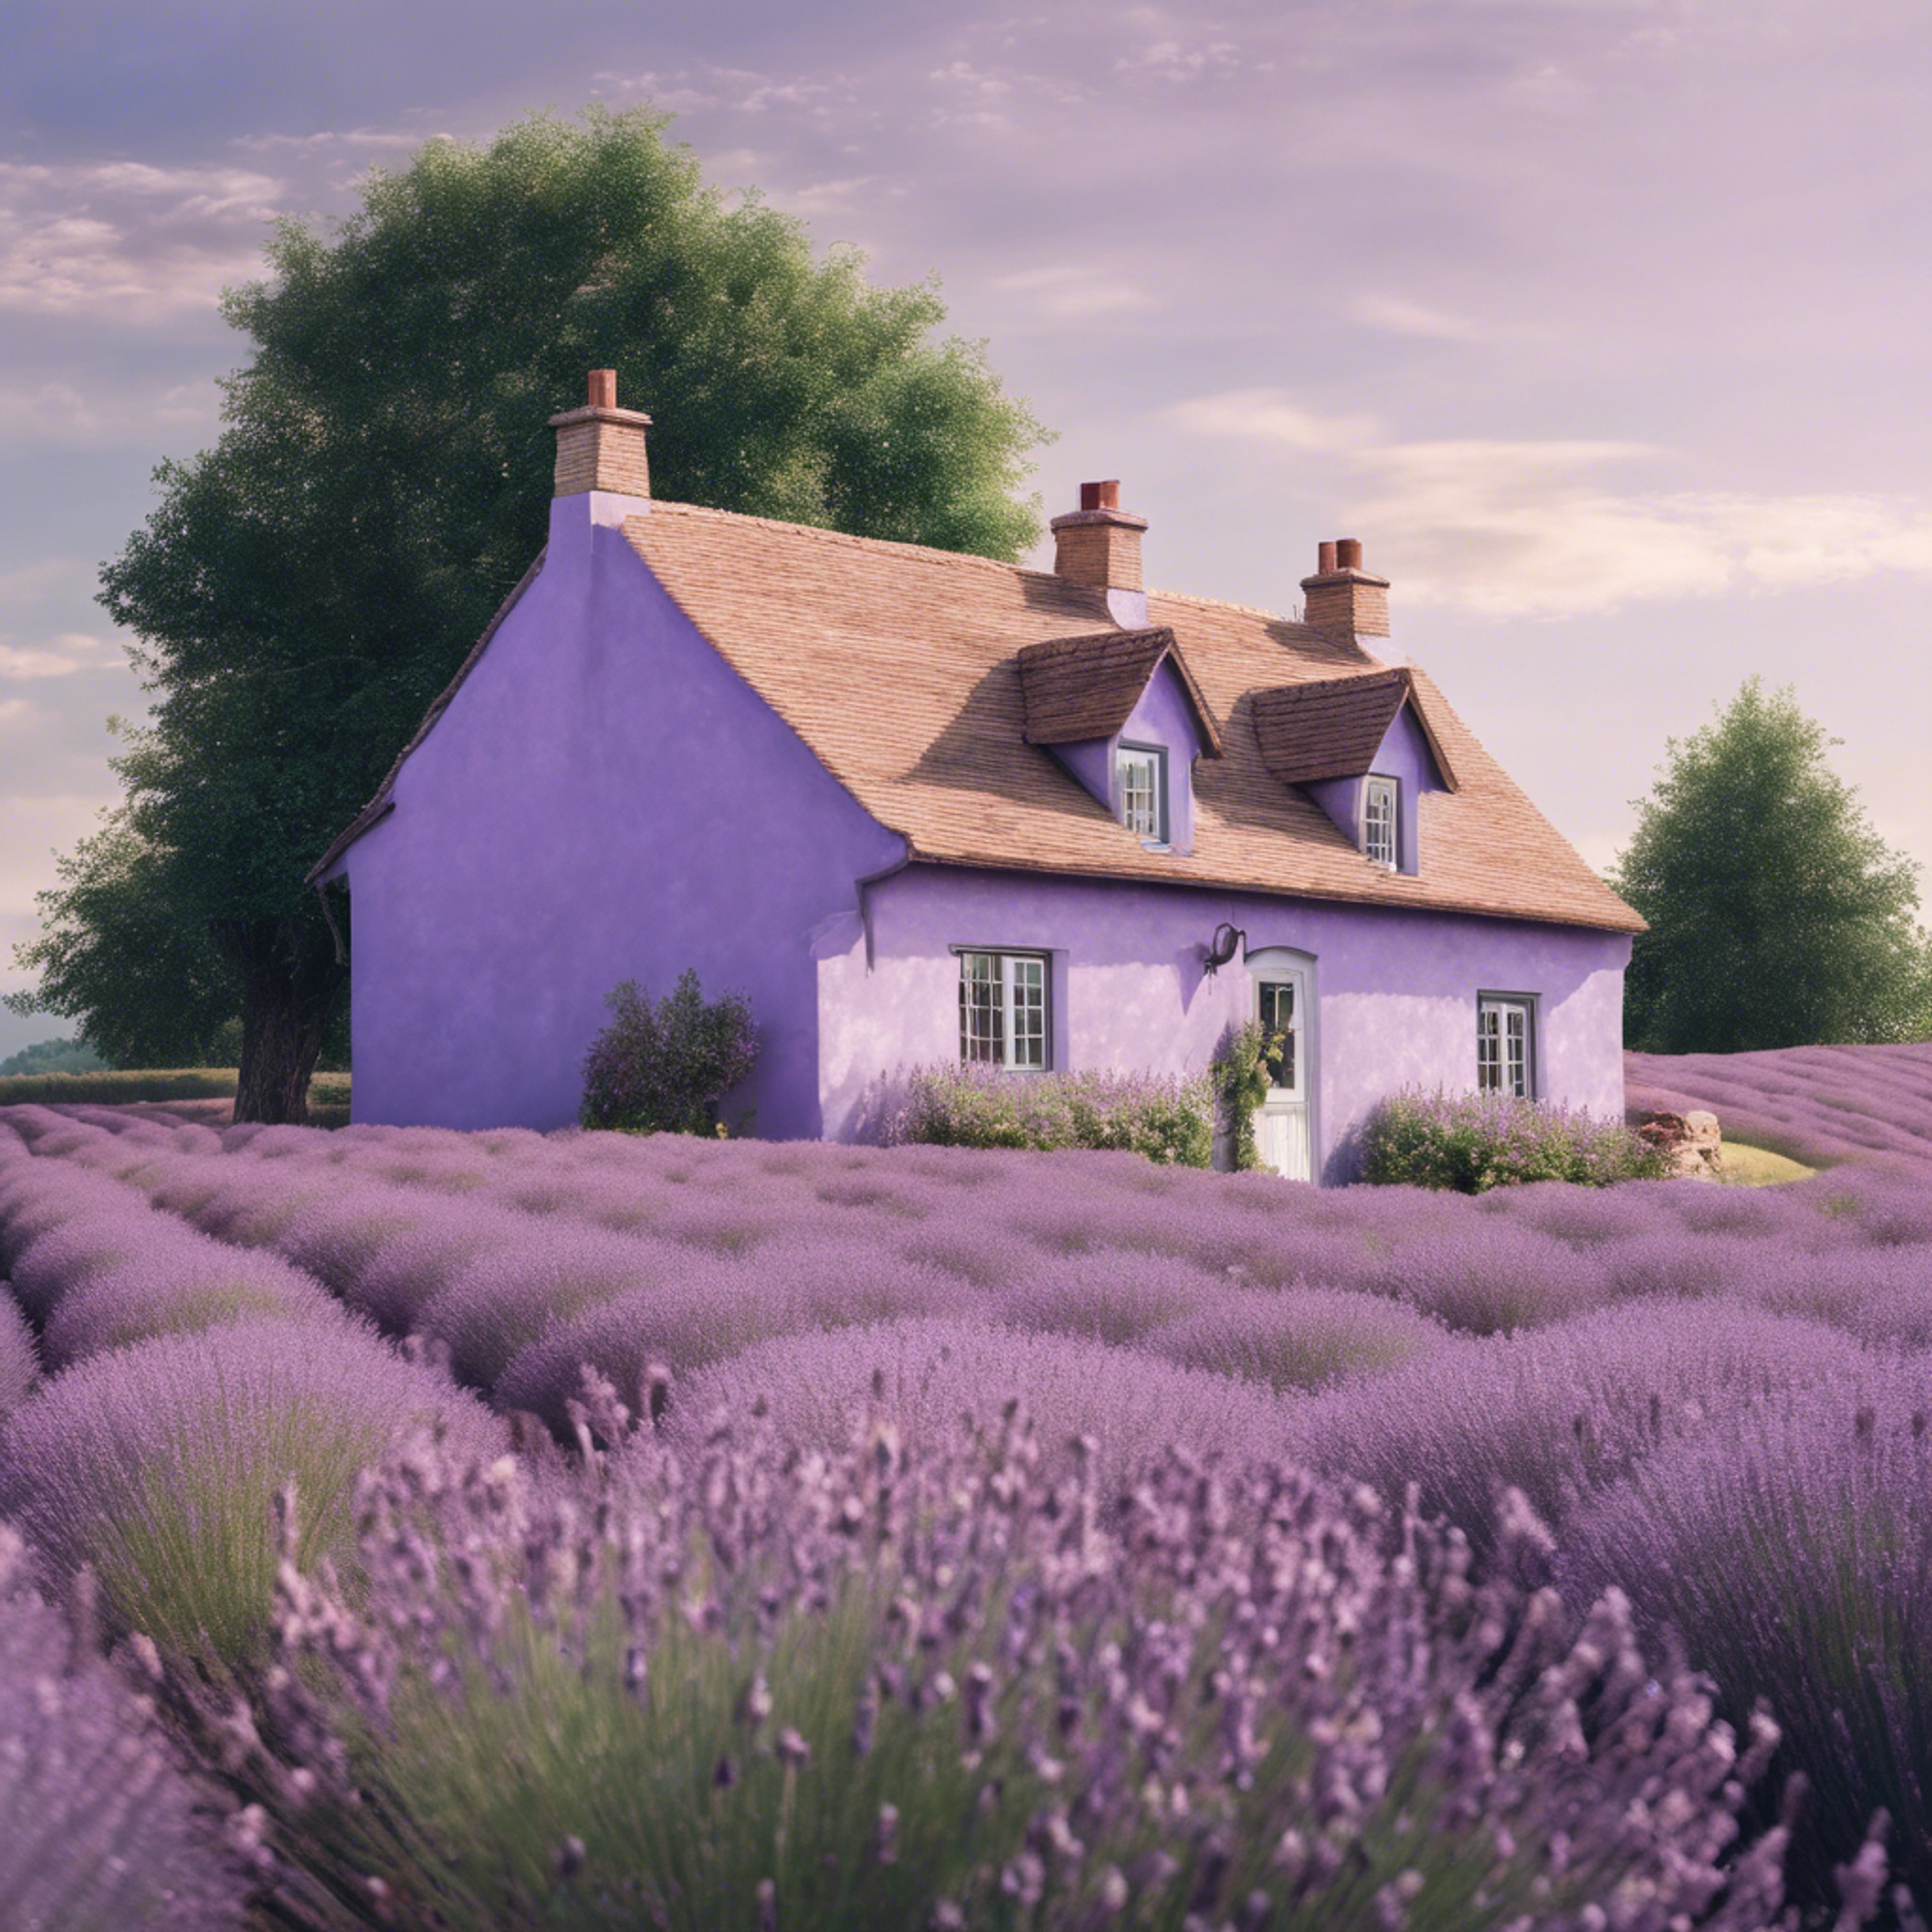 A quaint pastel purple cottage in the countryside surrounded by lavender fields. Wallpaper[9ff1532238764d01813b]